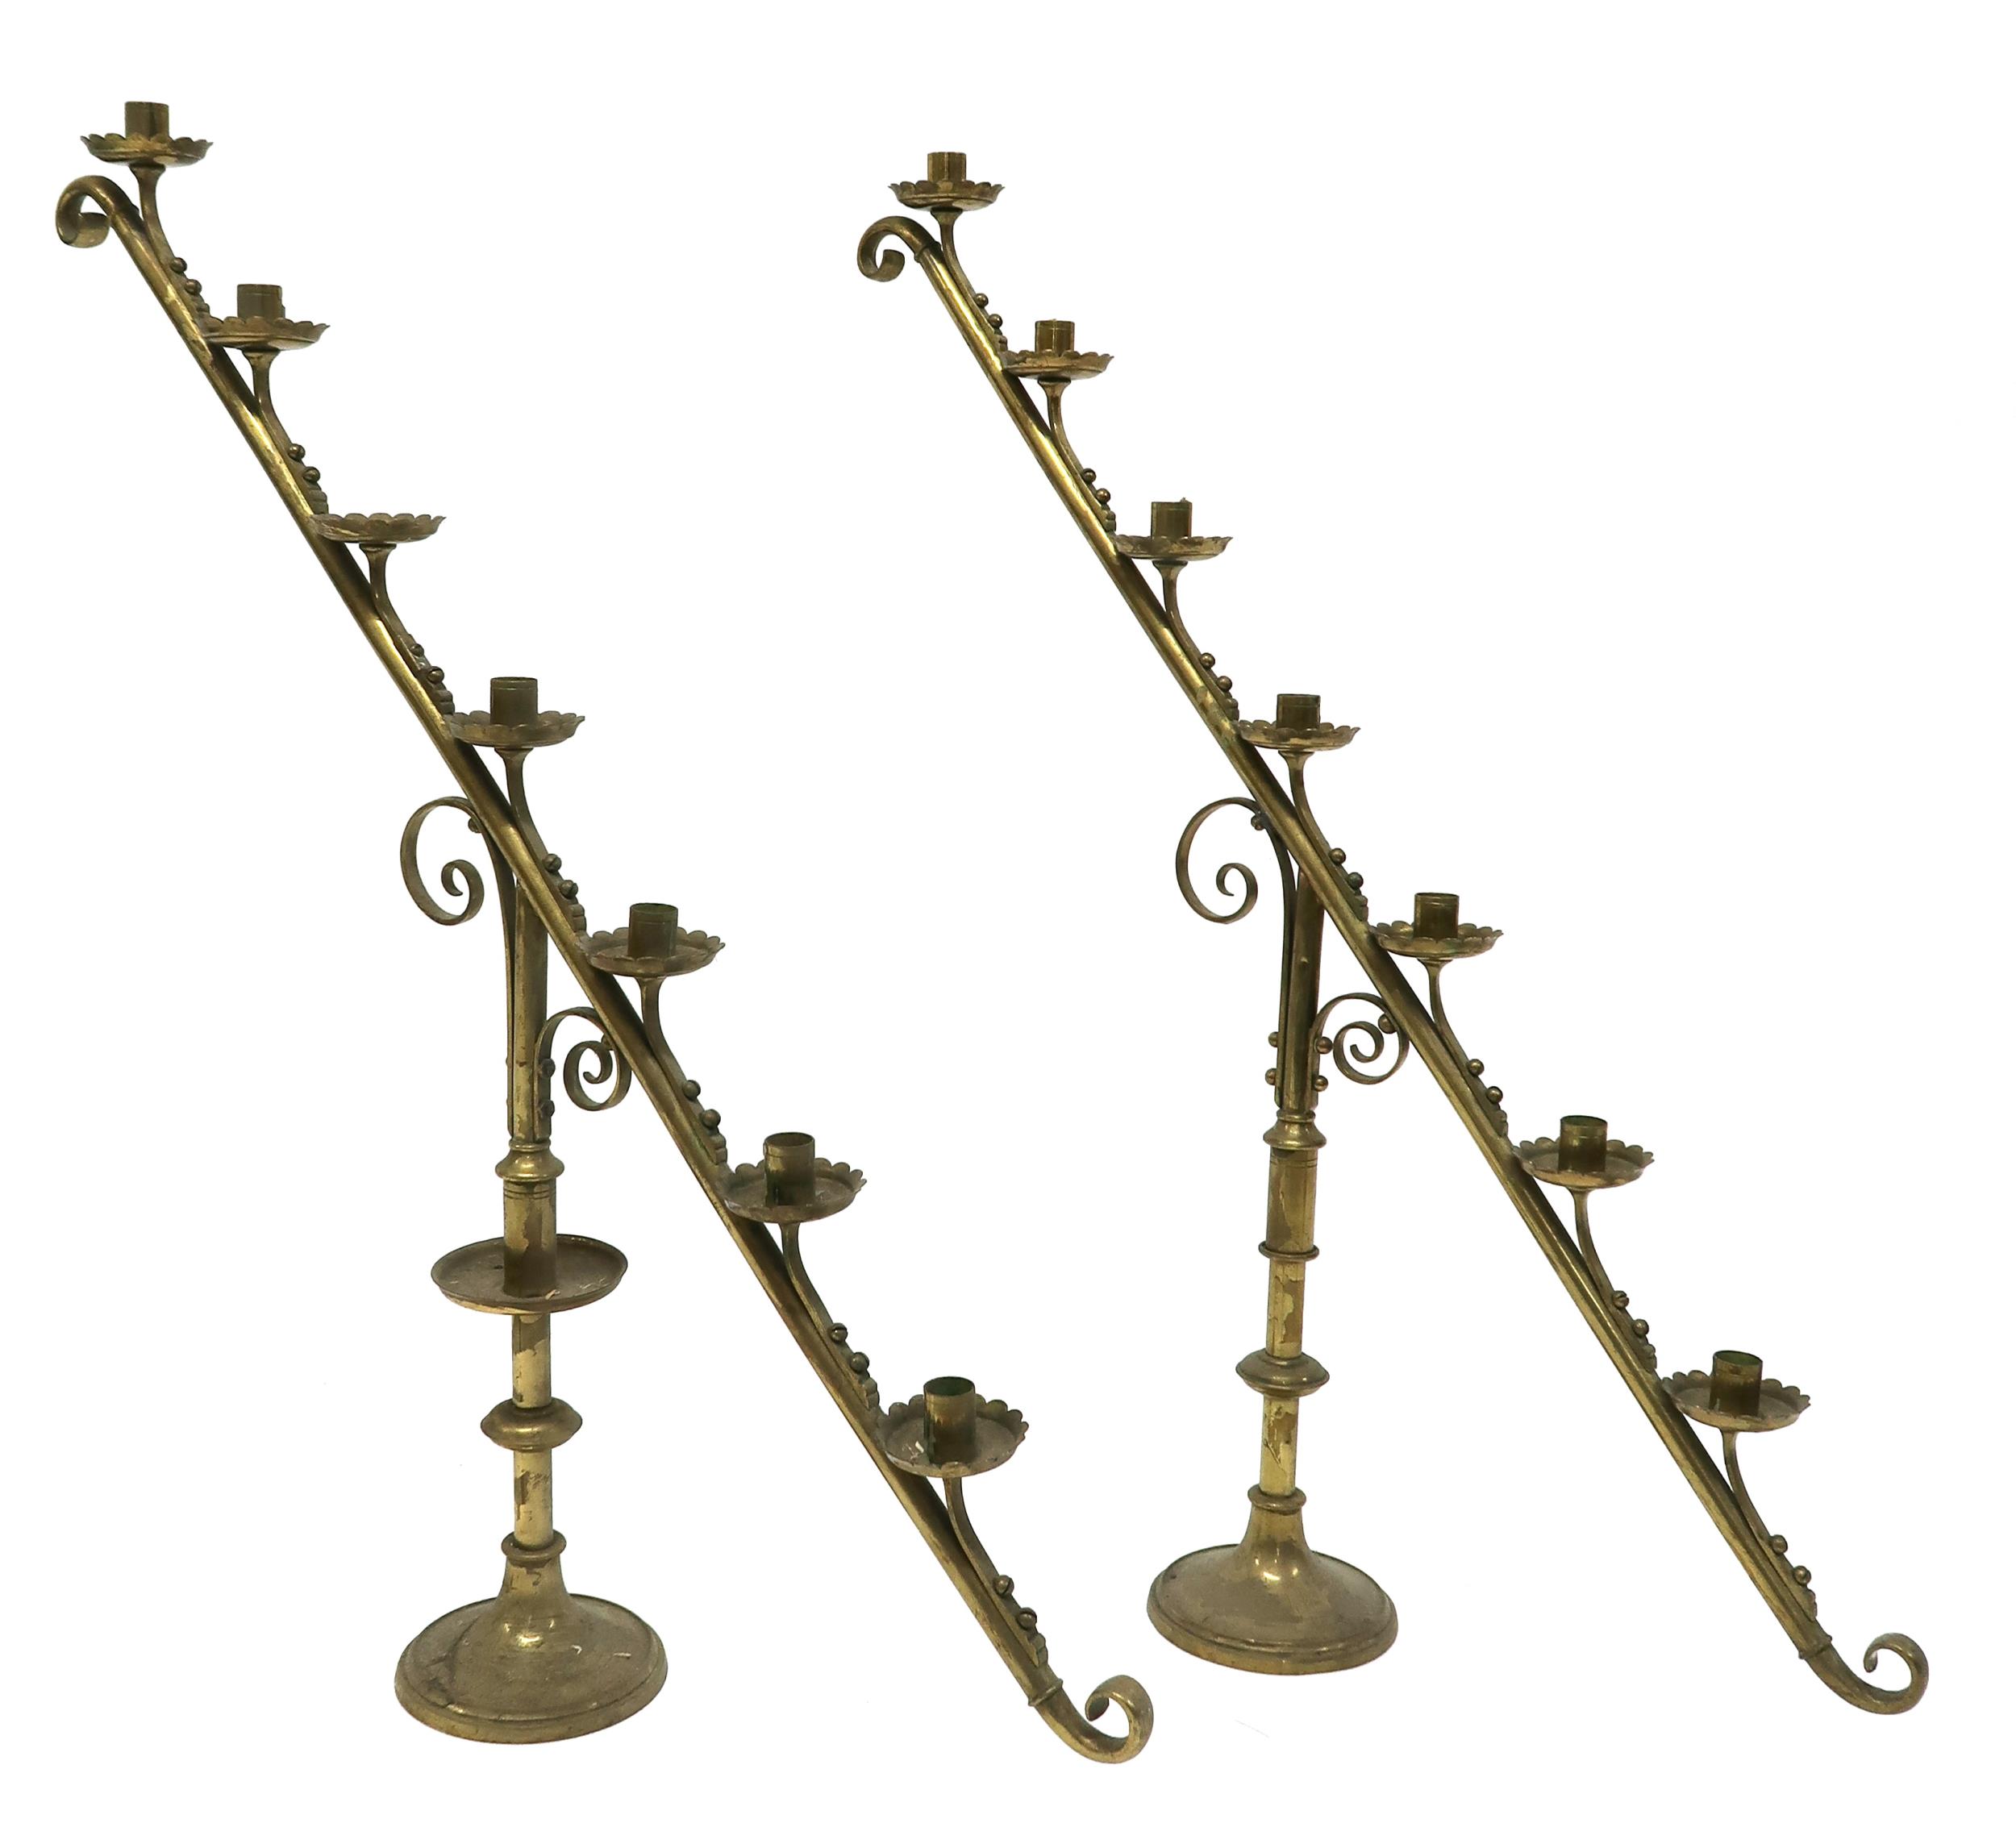 A PAIR OF 19TH CENTURY BRASS ECCLESIASTICAL SLOPED CANDELABRA each with seven candle holders with - Image 2 of 6